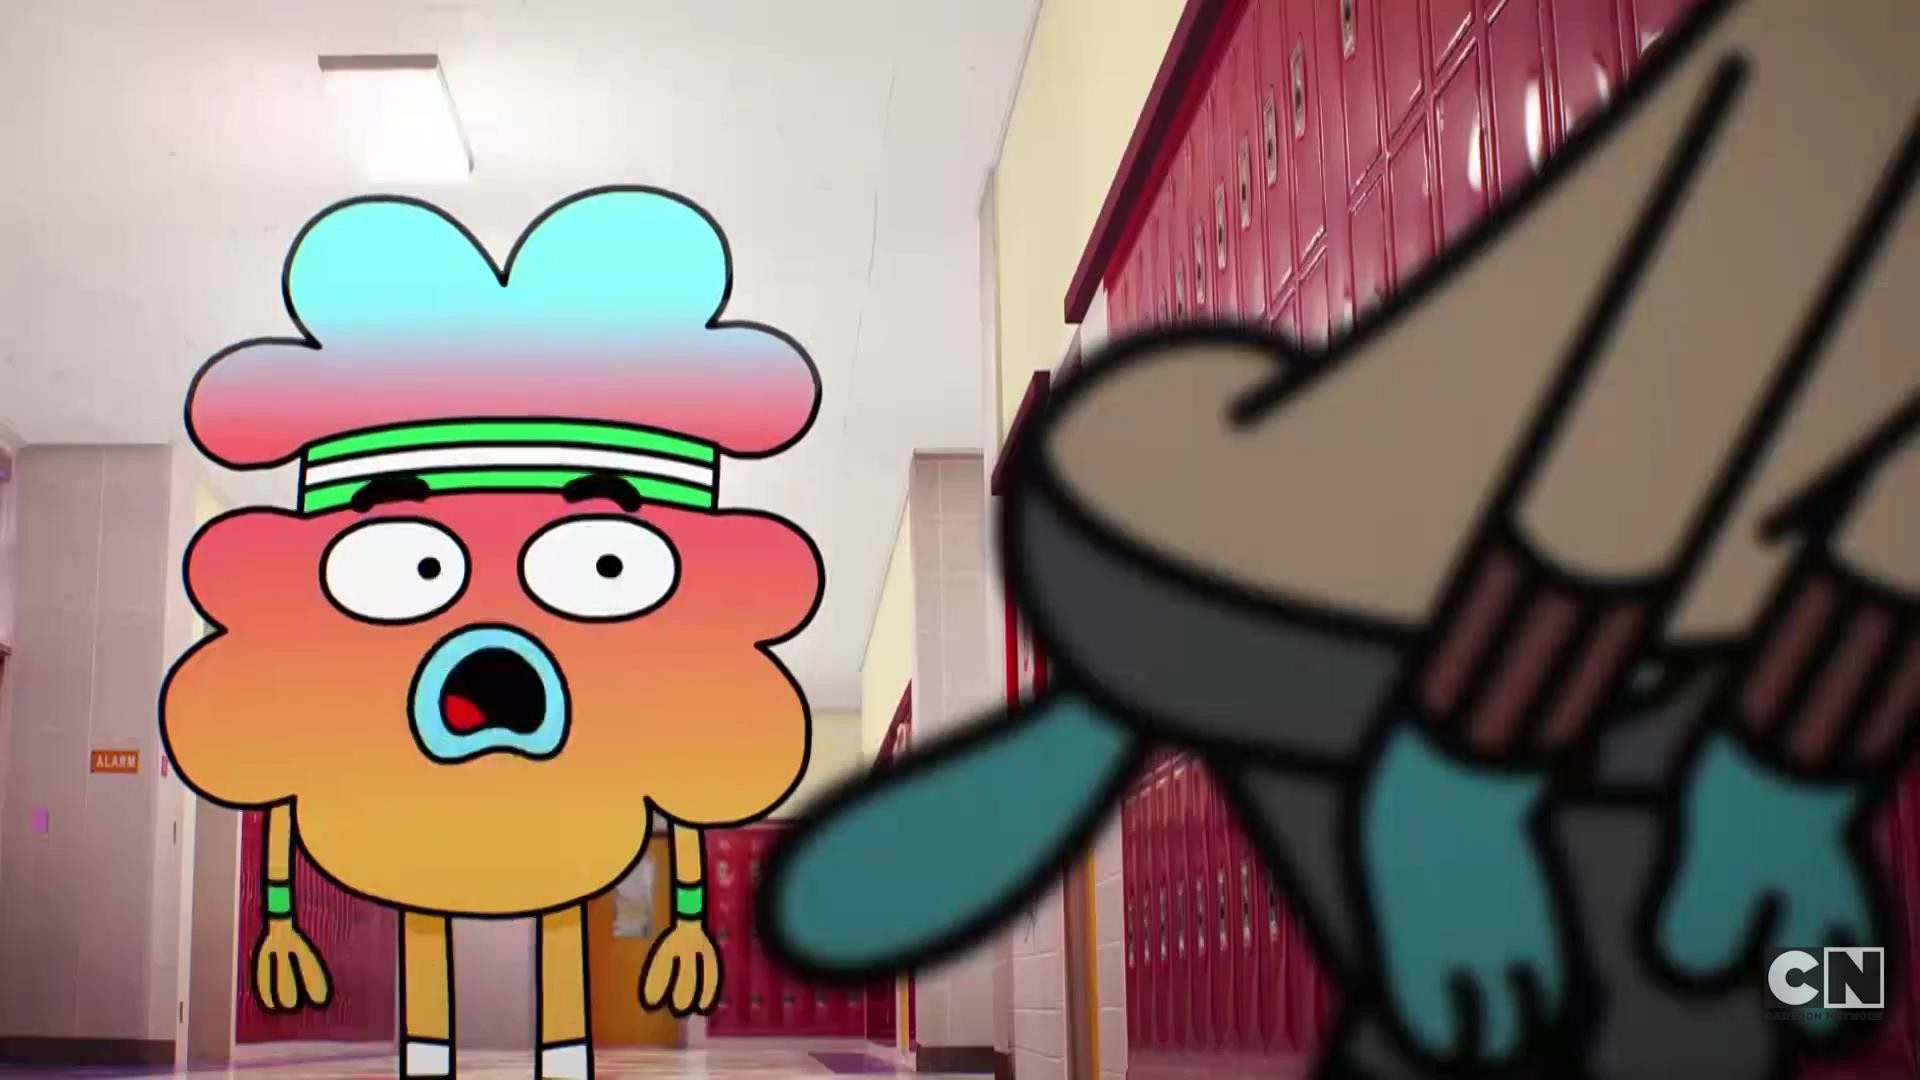 1920x1080 High-res Notes: 65 6/17/16 — 10:30pm Short URL:  https://tmblr.co/ZqMDvr283a3ea Filed under: #tawog #The Amazing World of  Gumball